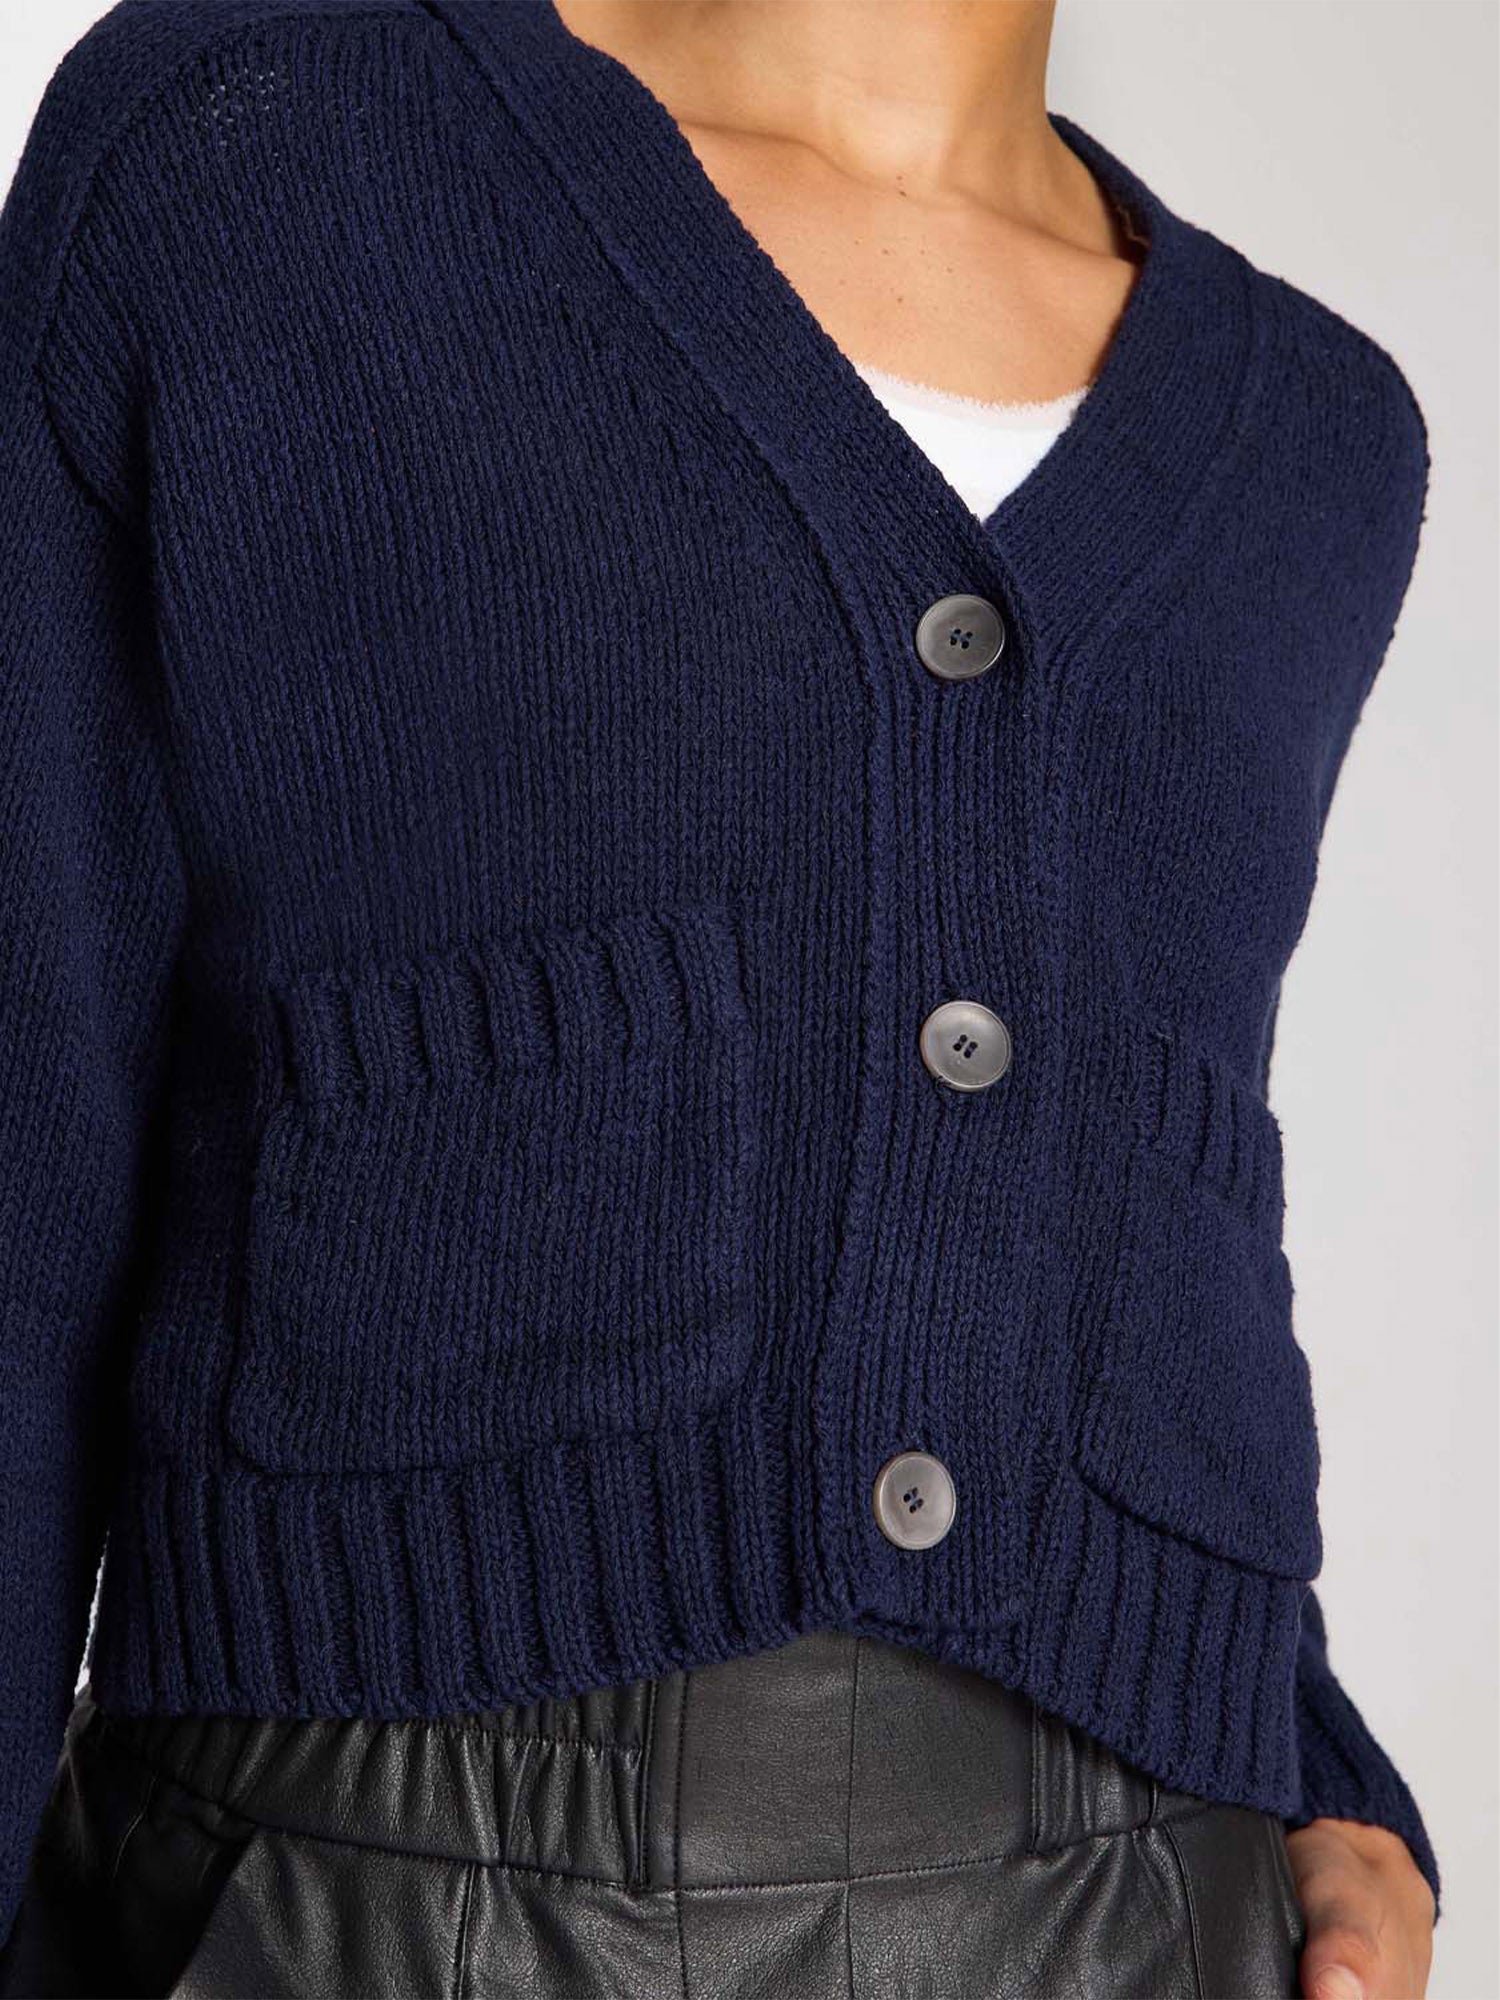 Cropped navy linen cotton cardigan sweater close up